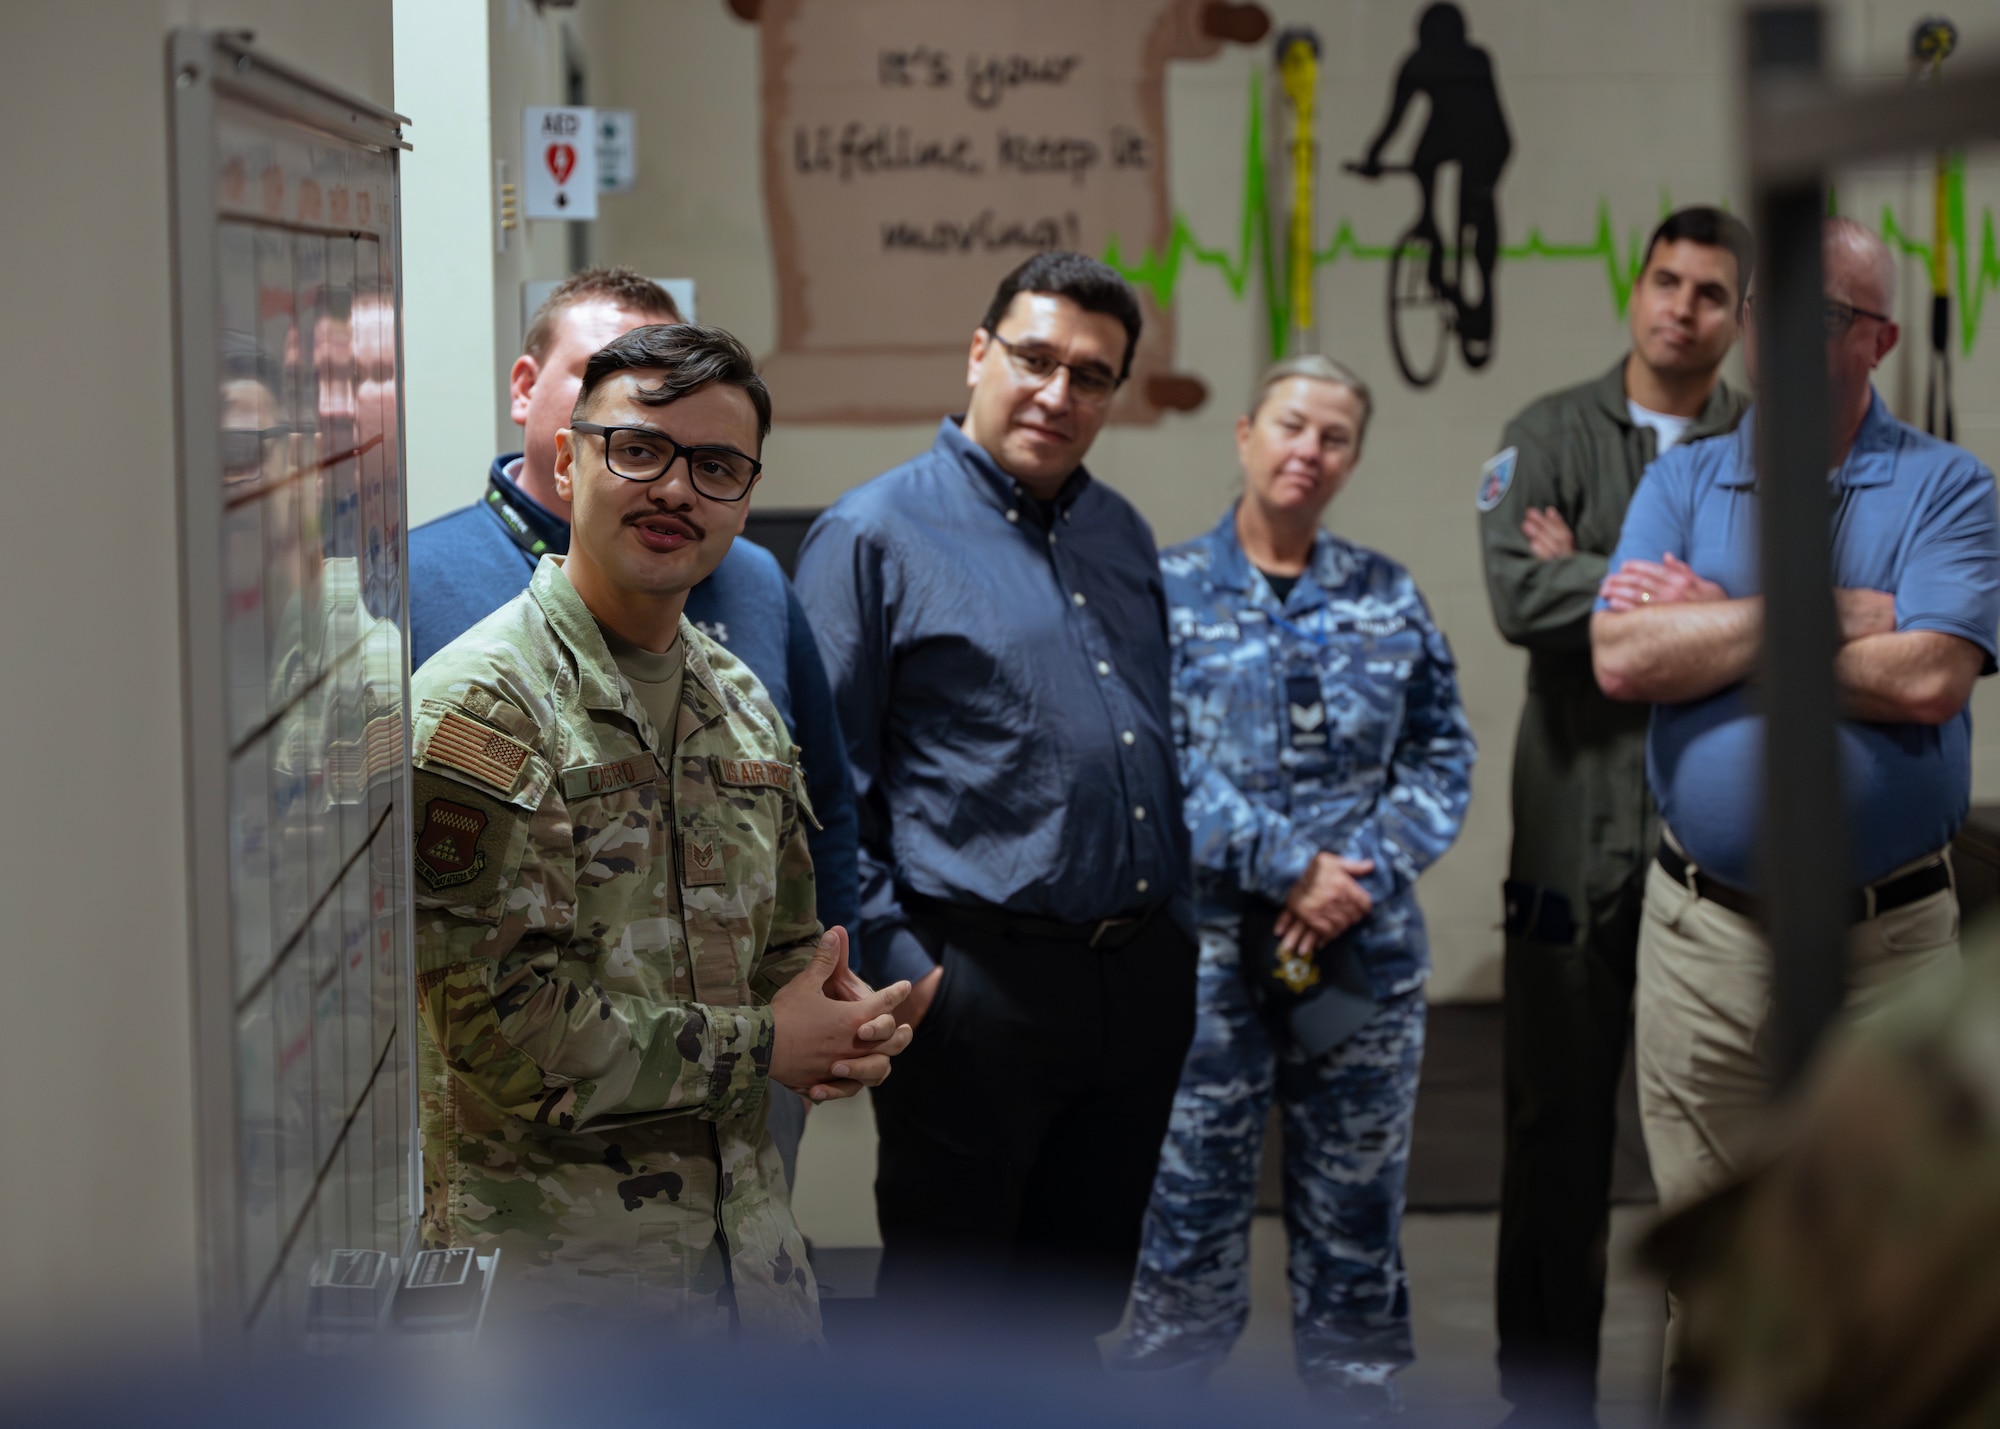 U.S. Air Force Staff Sgt. Ricardo Castro, Air Force Mortuary Affairs Operations mental health technician, briefs a team of Foreign Liaison Officers at Dover Air Force Base, Delaware, April 24, 2024. This visit gave the Foreign Liaison Officers a chance to learn about AFMAO’s role in honoring our fallen. (U.S. Air Force photo by Staff Sgt. Jayden Ford)